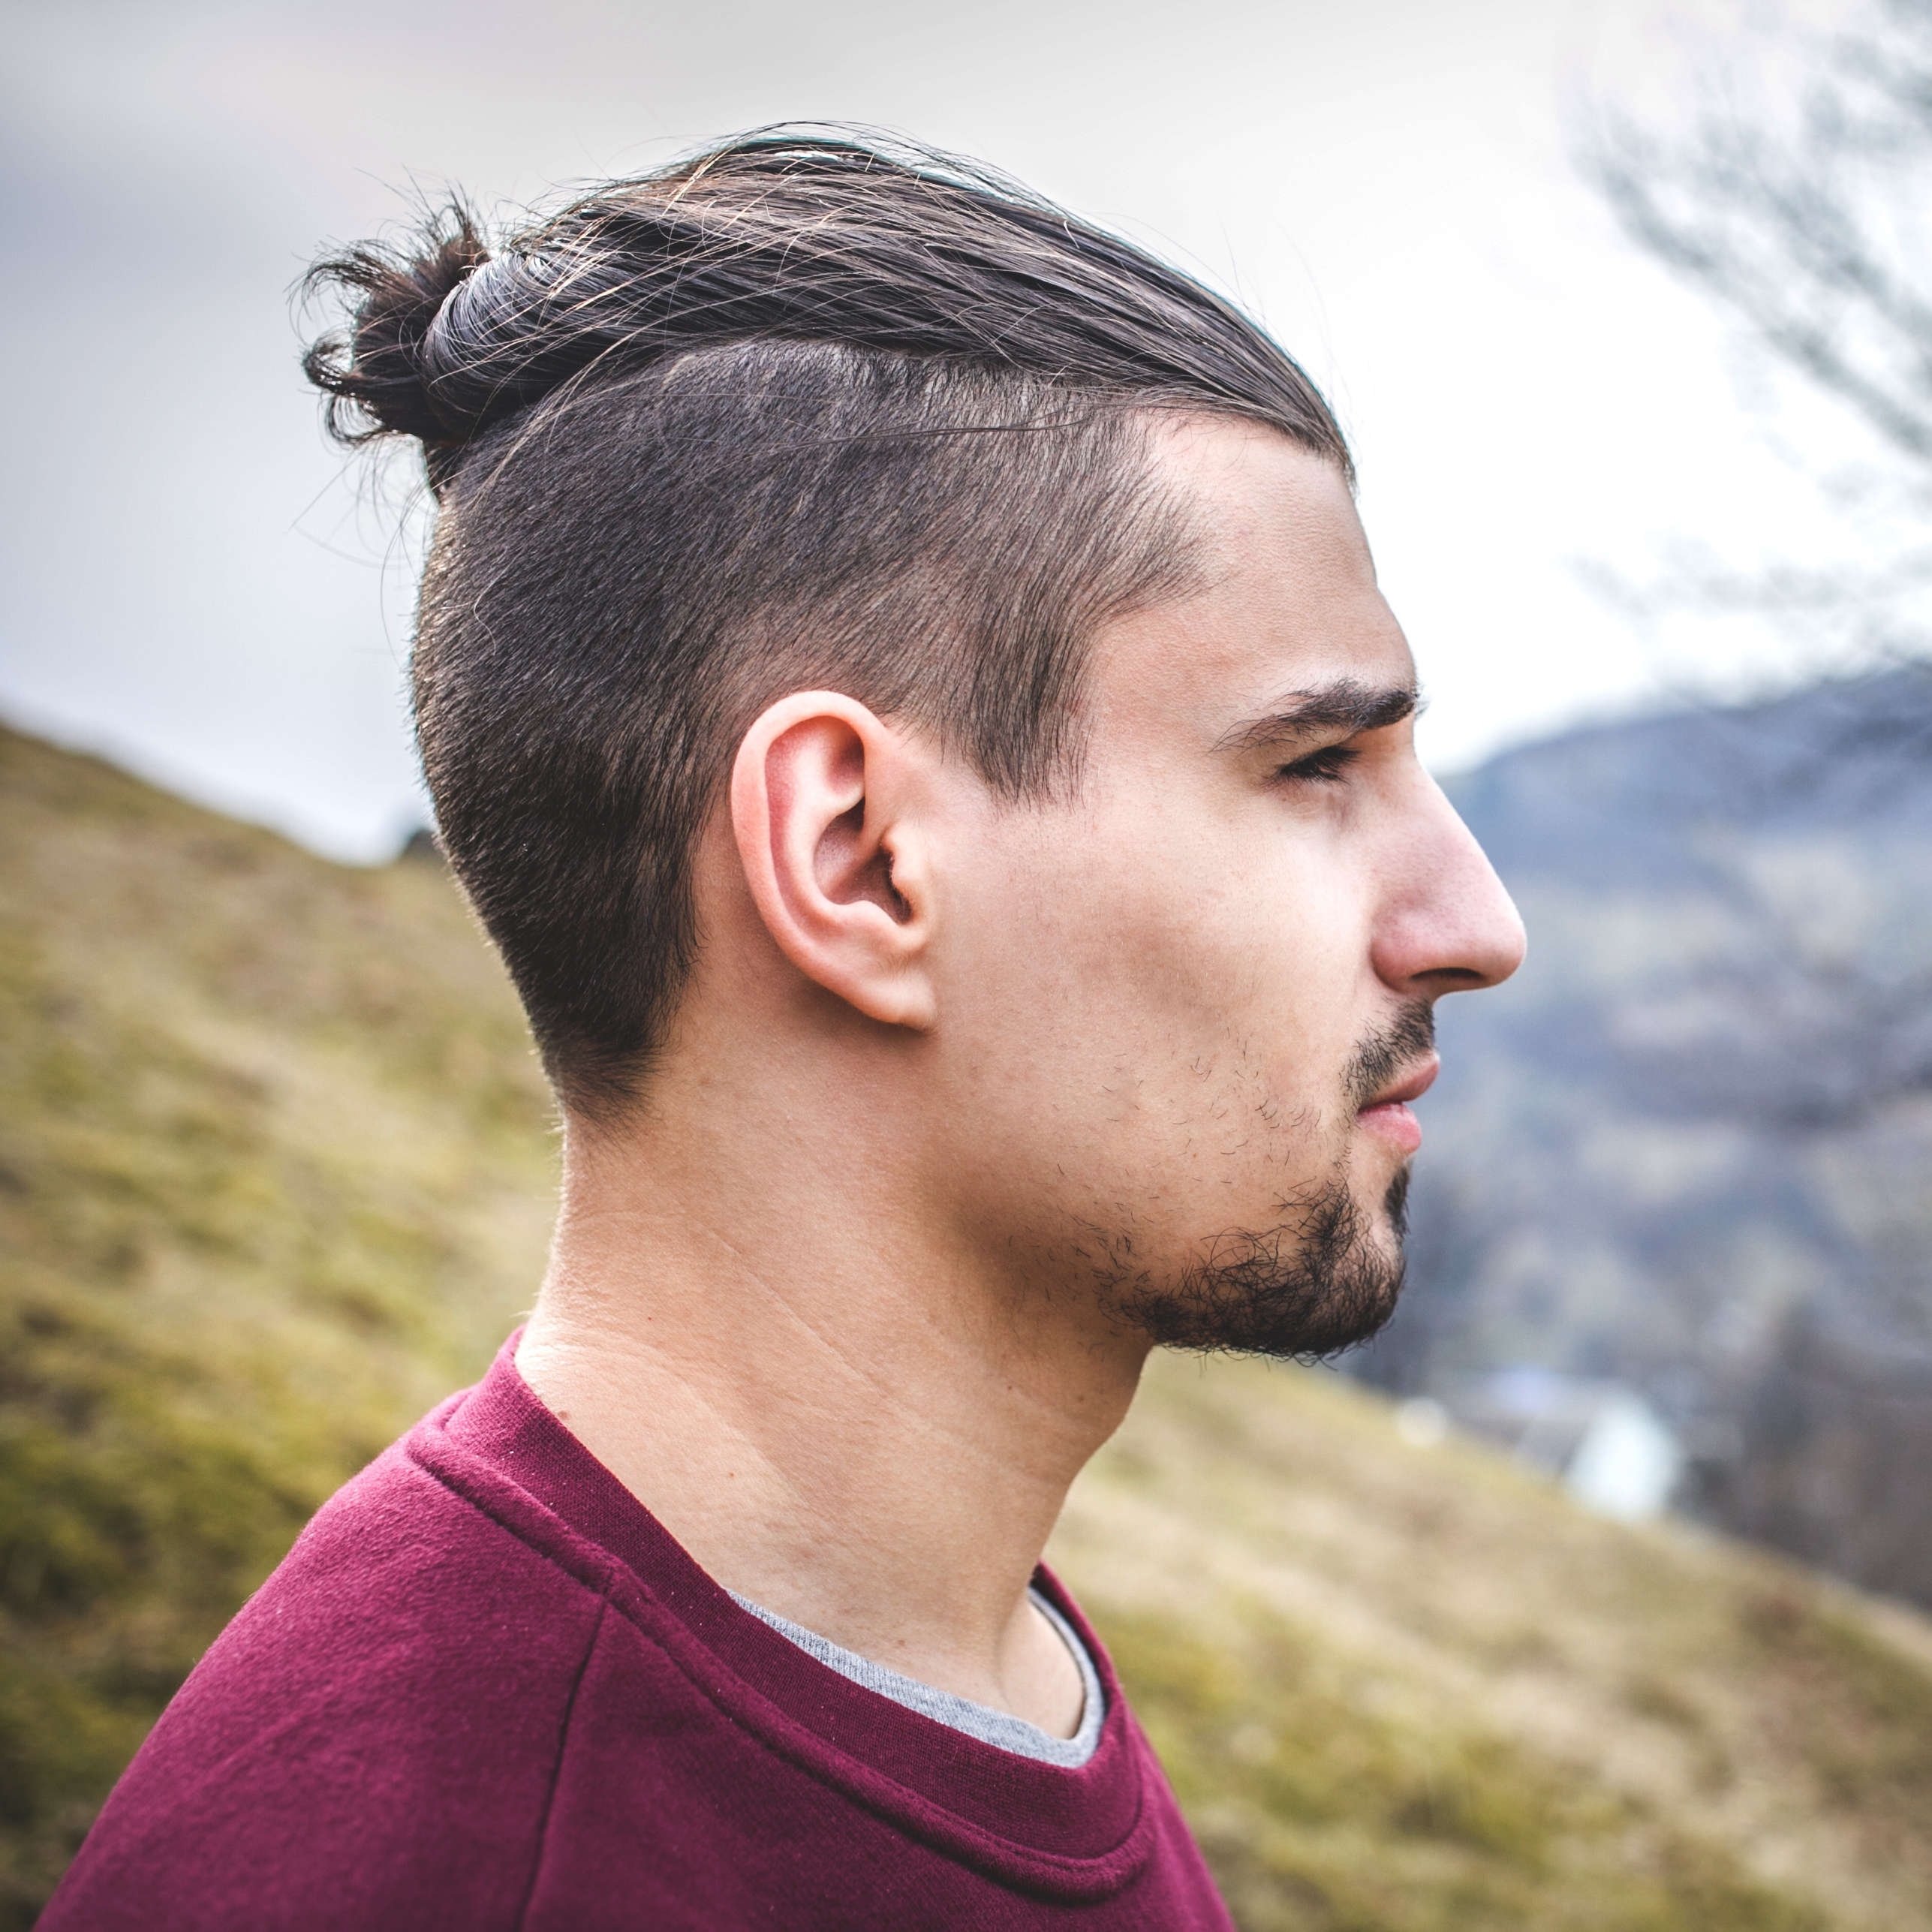 The Top Knot Hairstyle - Visual Guide For Men (7 Different Styles) within Asian Ponytail Hairstyles Male